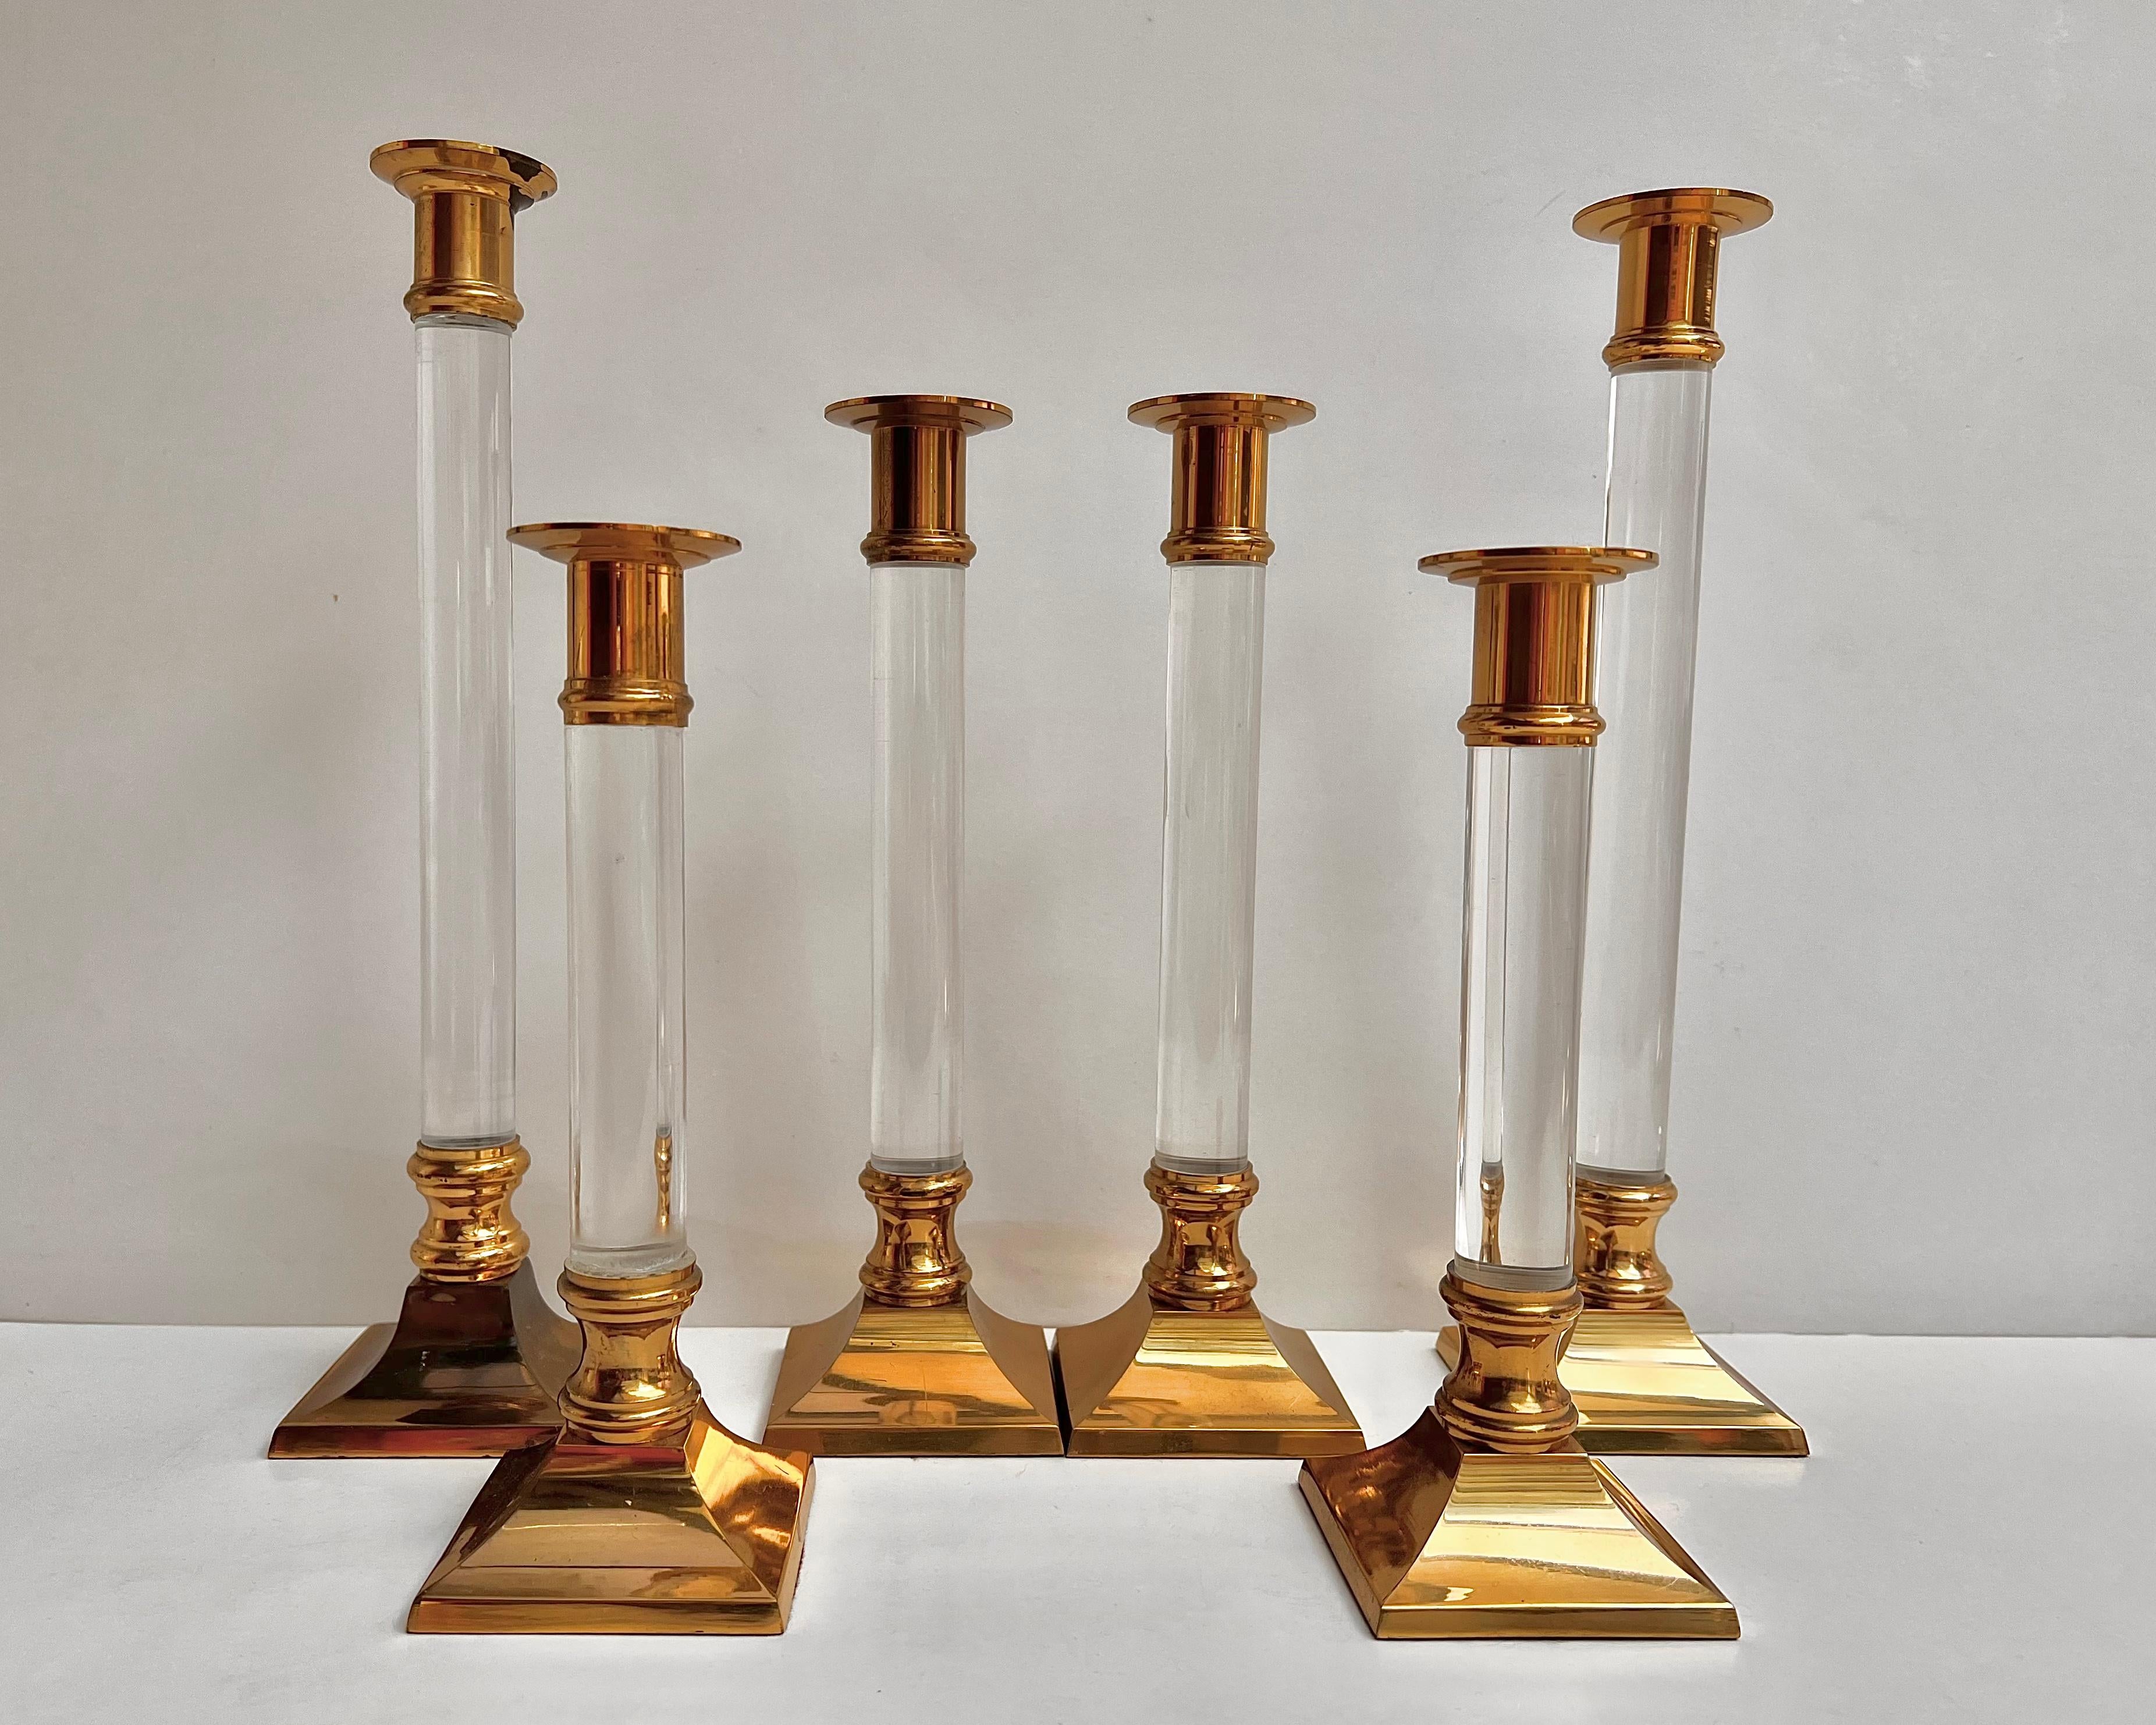 Original Vintage Set of 6 Candlesticks made of gilt brass and plexiglass.

Manufactured in France, 1970s.

The product is made of high-quality brass and plexiglass characterized by resistance to temperature effects and mechanical damage.